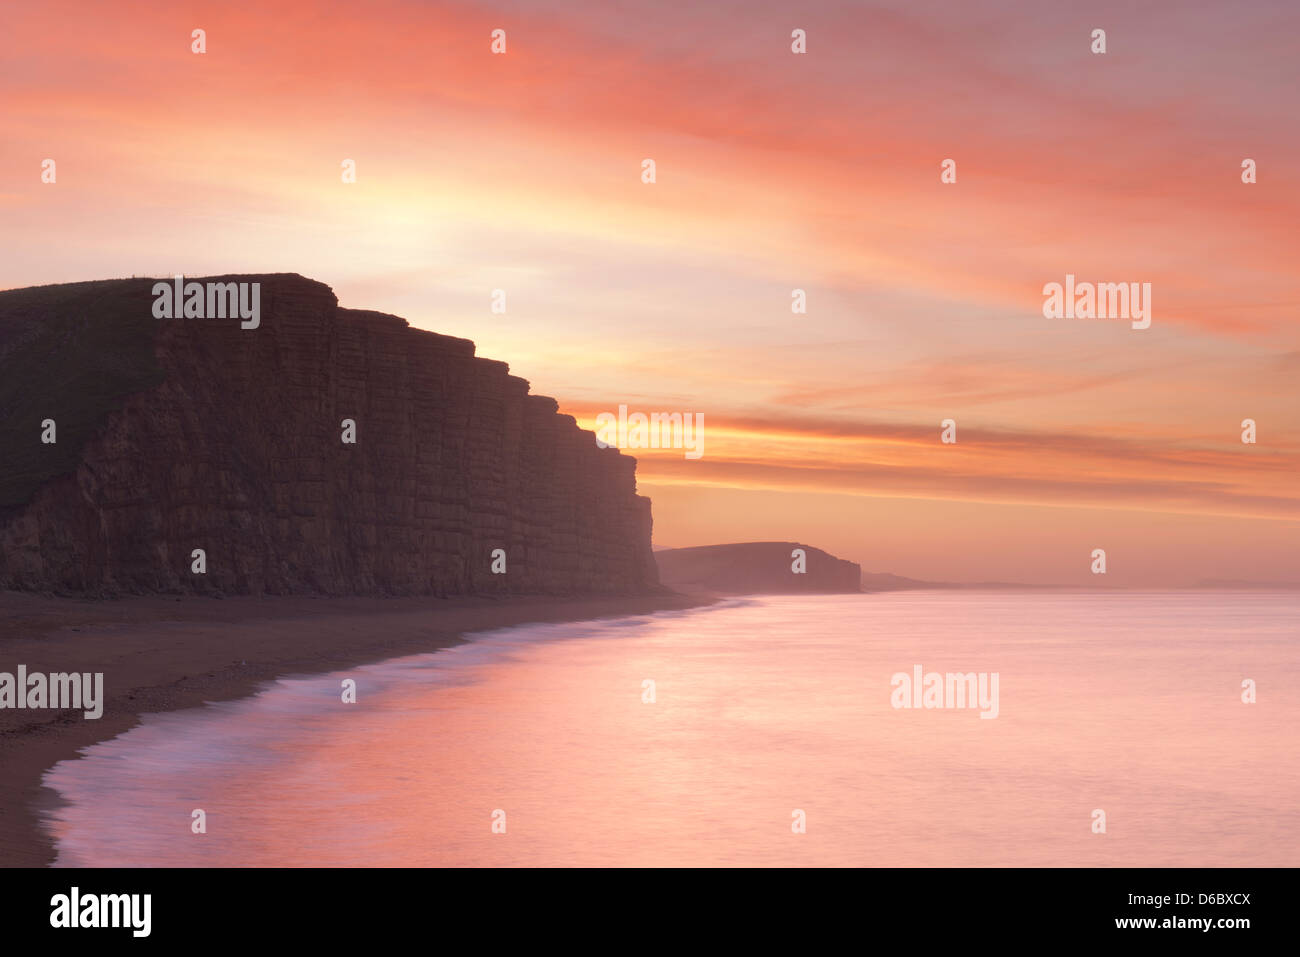 A stunning red sunrise in the sky above East Cliff at West Bay, Dorset, UK. Stock Photo